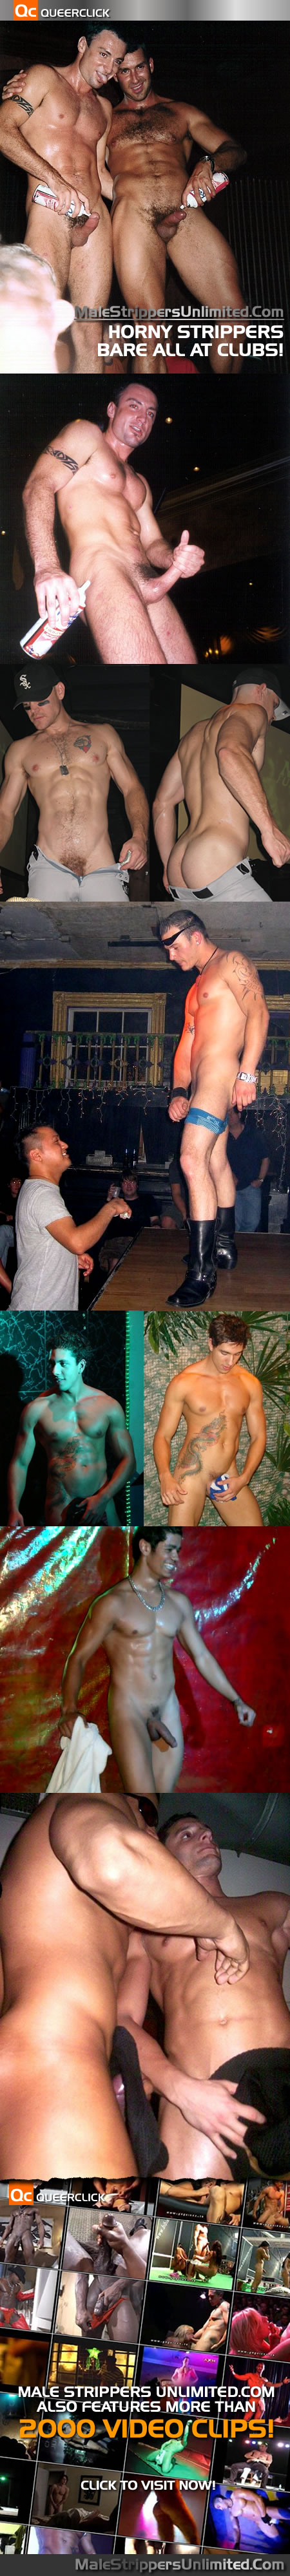 Male Strippers Unlimited: Hunky Strippers